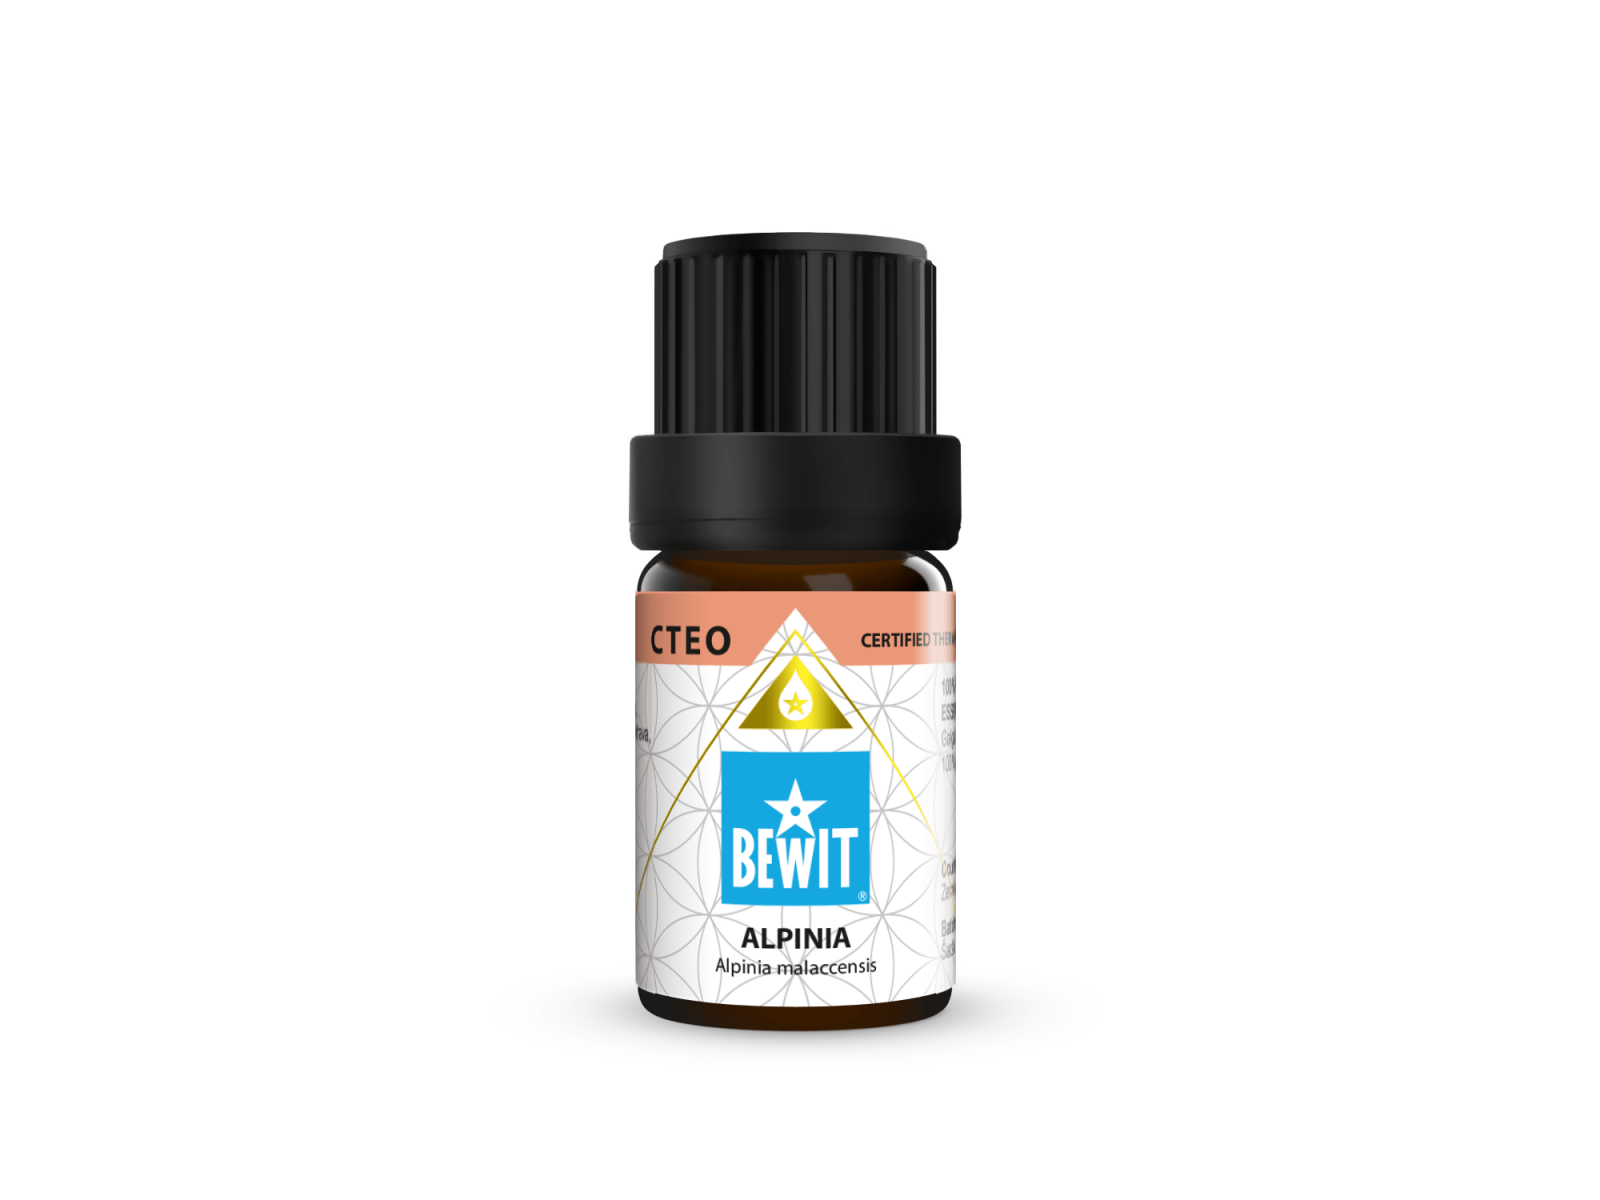 BEWIT Alpinia - 100% pure and natural CTEO® essential oil - 4